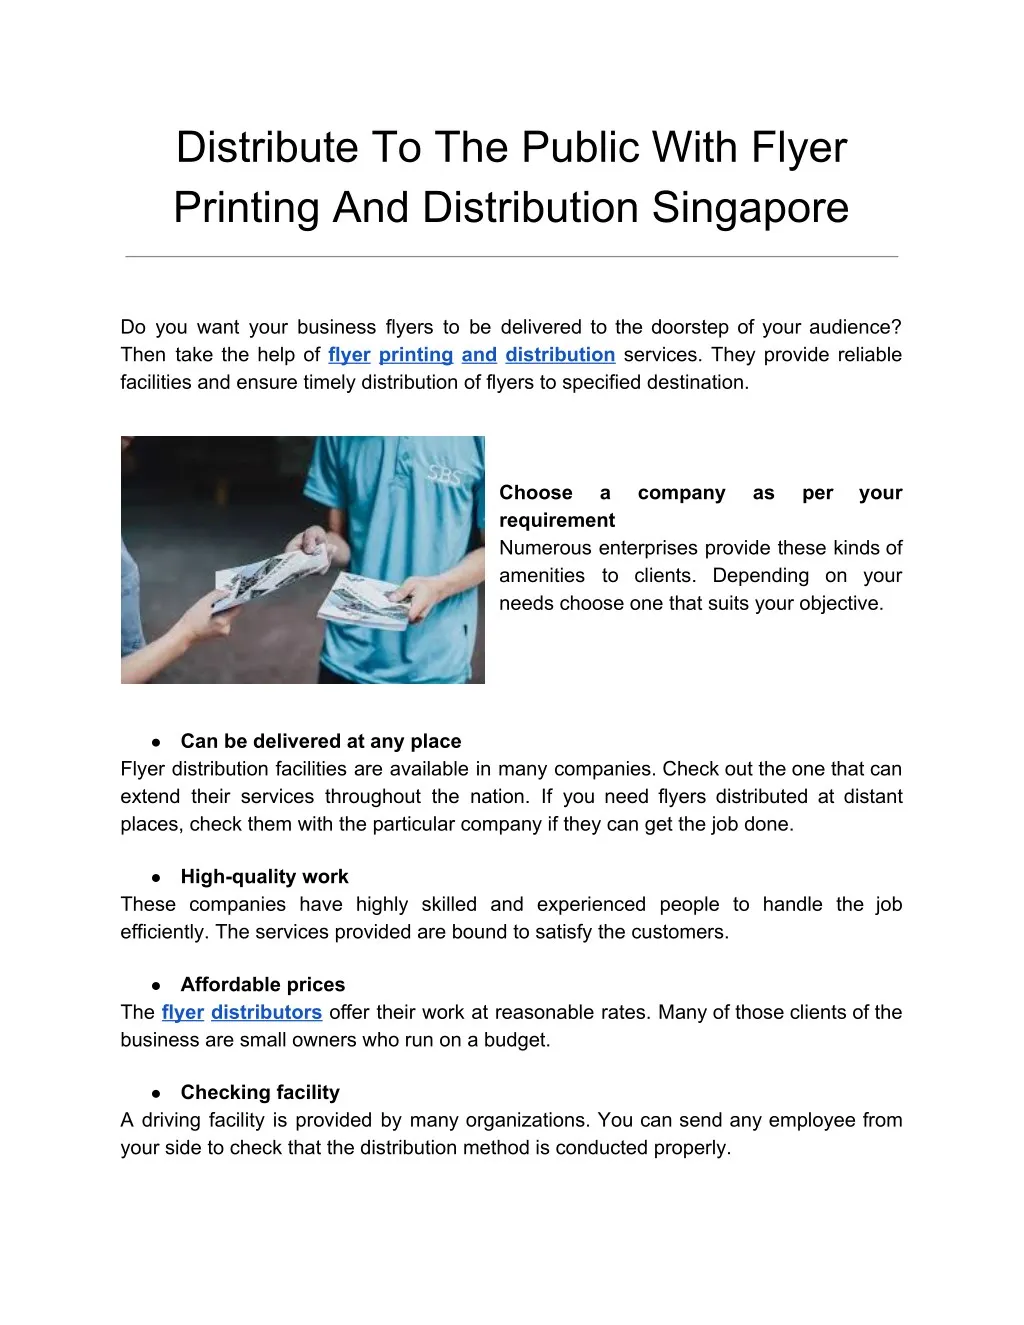 distribute to the public with flyer printing